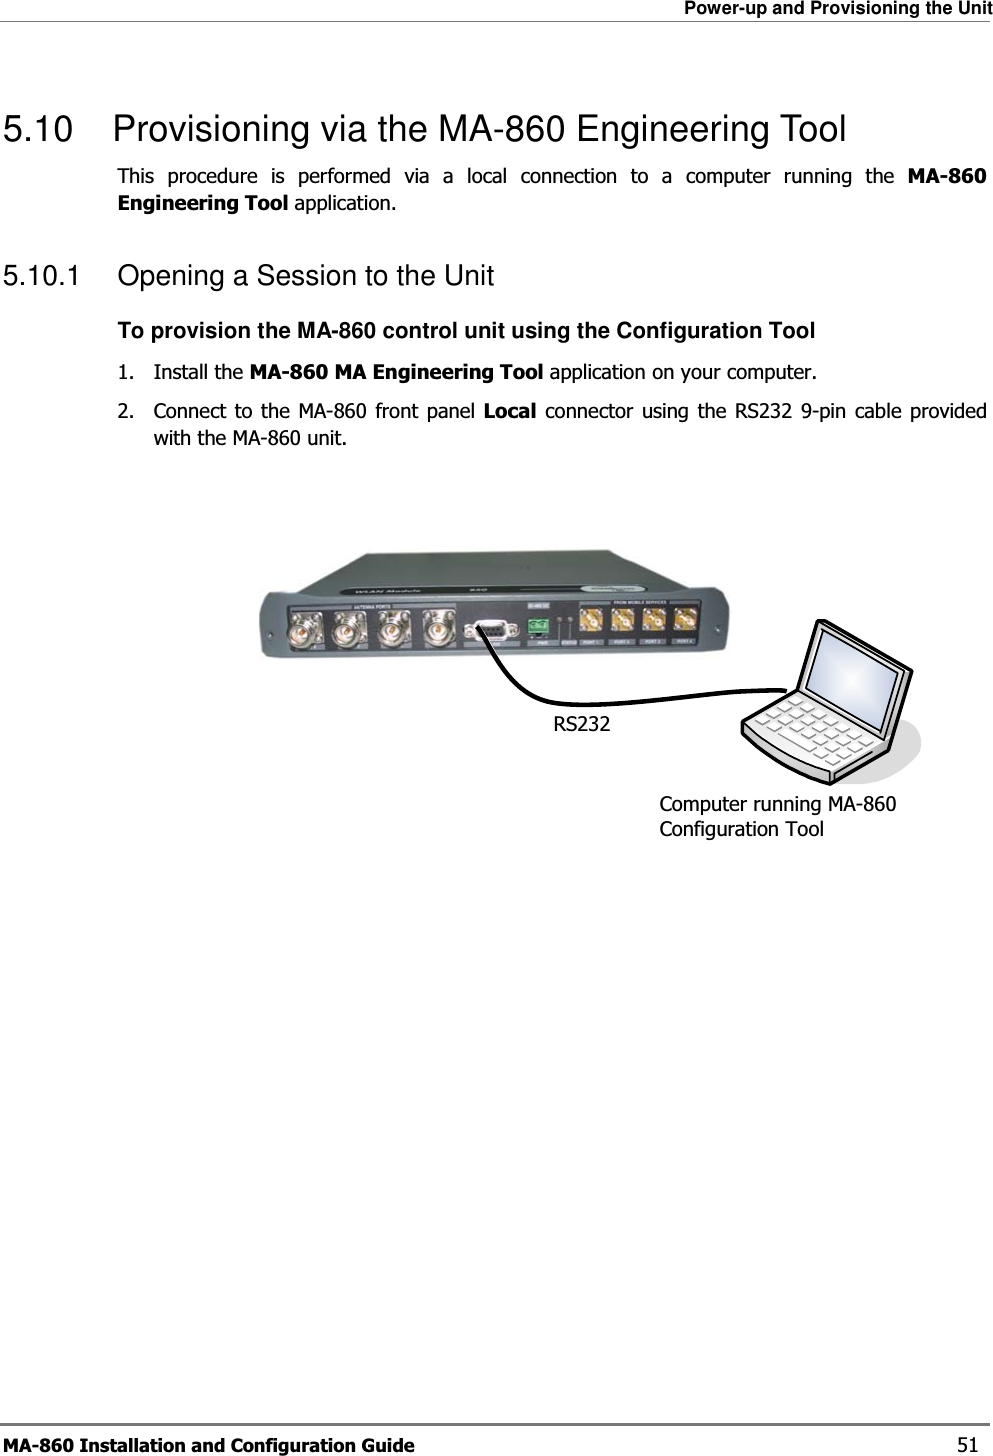 Power-up and Provisioning the Unit MA-860 Installation and Configuration Guide    51 5.10  Provisioning via the MA-860 Engineering Tool This procedure is performed via a local connection to a computer running the MA-860 Engineering Tool application.  5.10.1  Opening a Session to the Unit To provision the MA-860 control unit using the Configuration Tool 1. Install the MA-860 MA Engineering Tool application on your computer. 2.  Connect to the MA-860 front panel Local connector using the RS232 9-pin cable provided with the MA-860 unit.        RS232 Computer running MA-860 Configuration Tool 